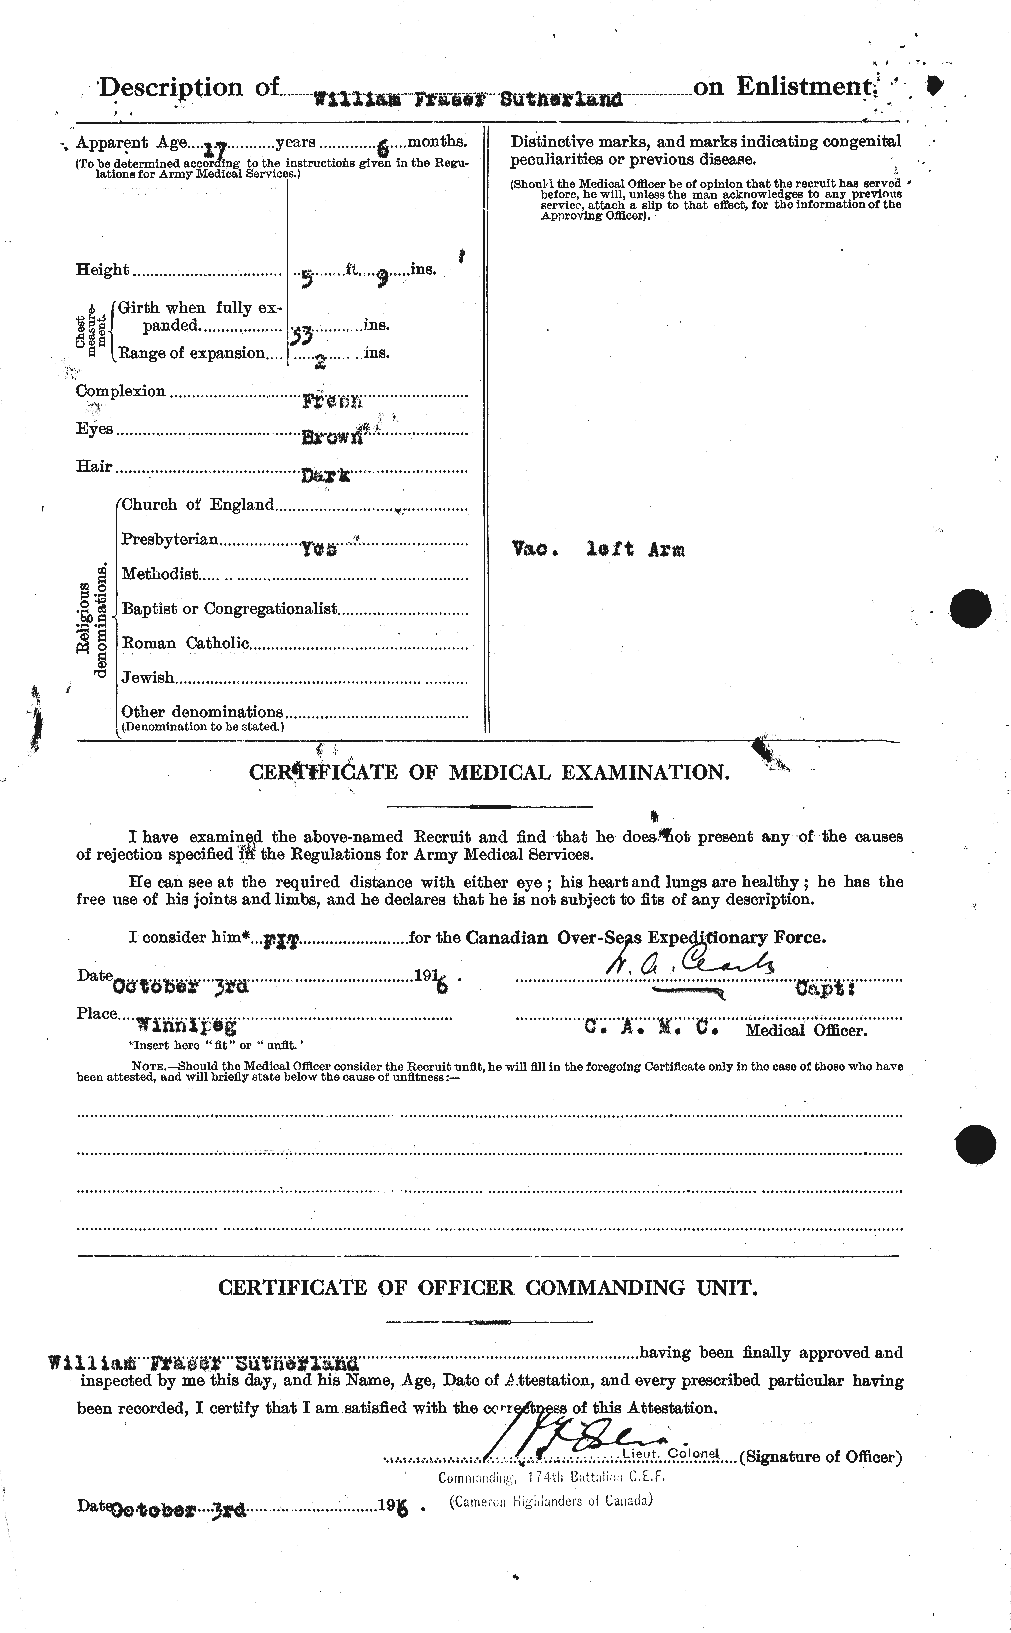 Personnel Records of the First World War - CEF 126432b